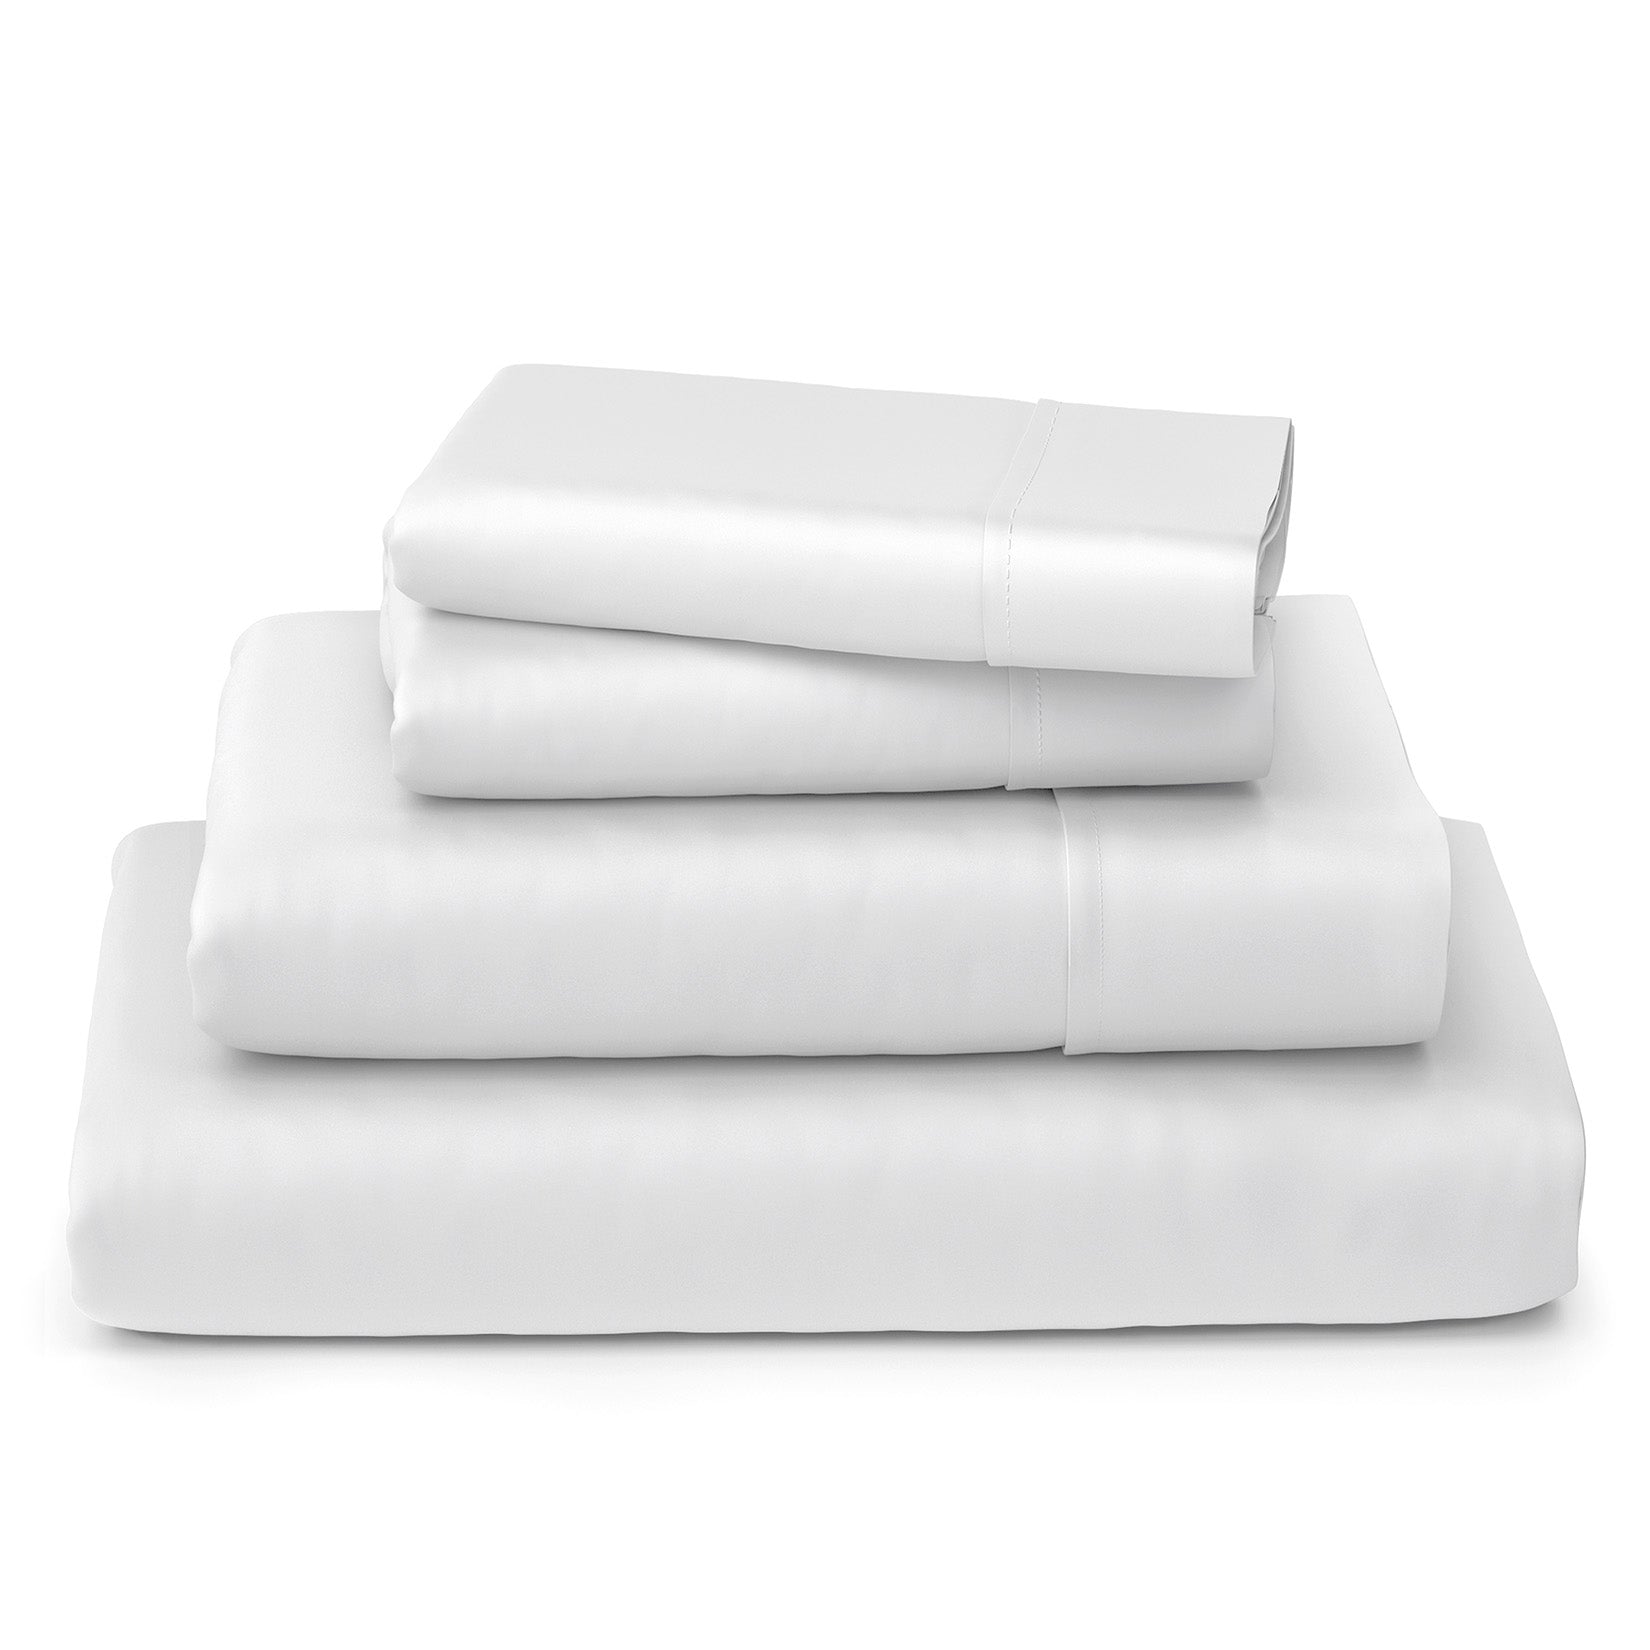 At Home Wash Laundry Sheets White - At Home Essentials